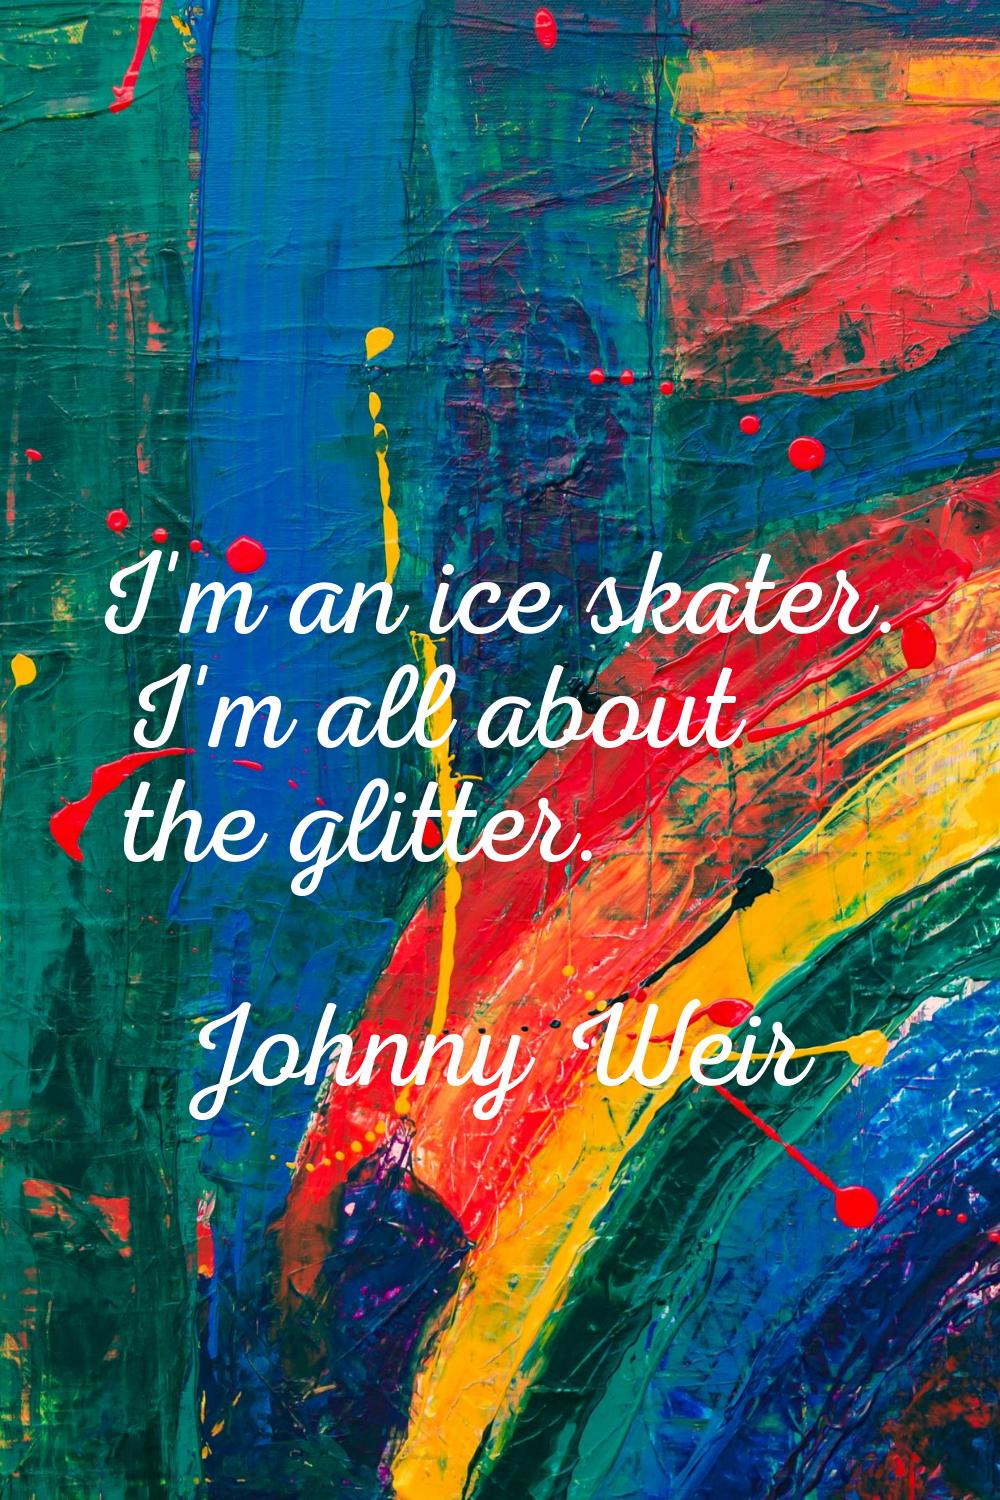 I'm an ice skater. I'm all about the glitter.